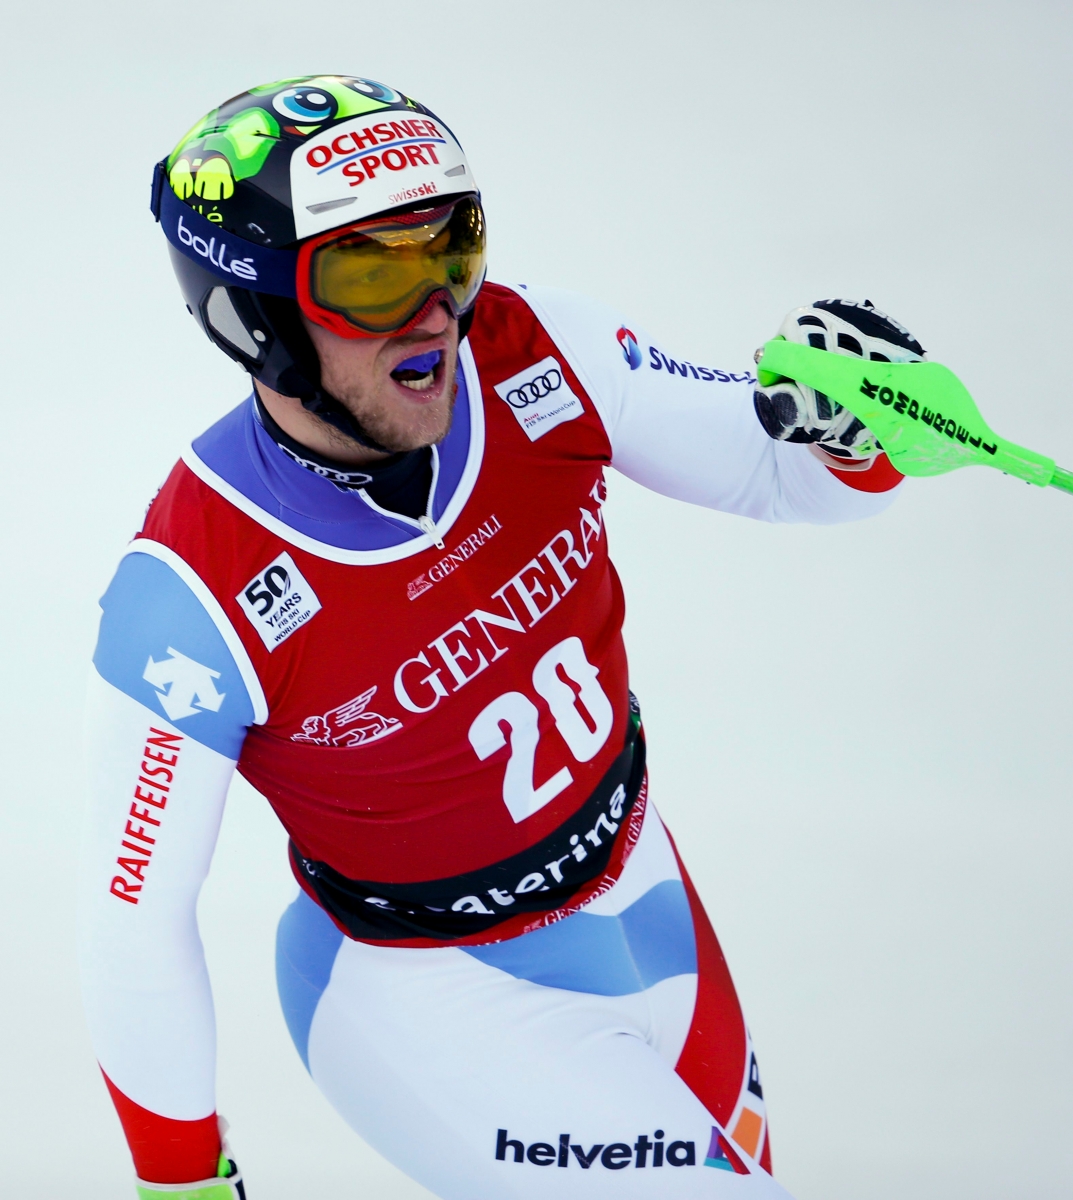 Switzerland's Justin Murisier gets to the finish area after completing an alpine ski, men's World Cup combined in Santa Caterina, Italy, Thursday, Dec. 29, 2016. (AP Photo/Marco Trovati) Italy Alpine Skiing World Cup